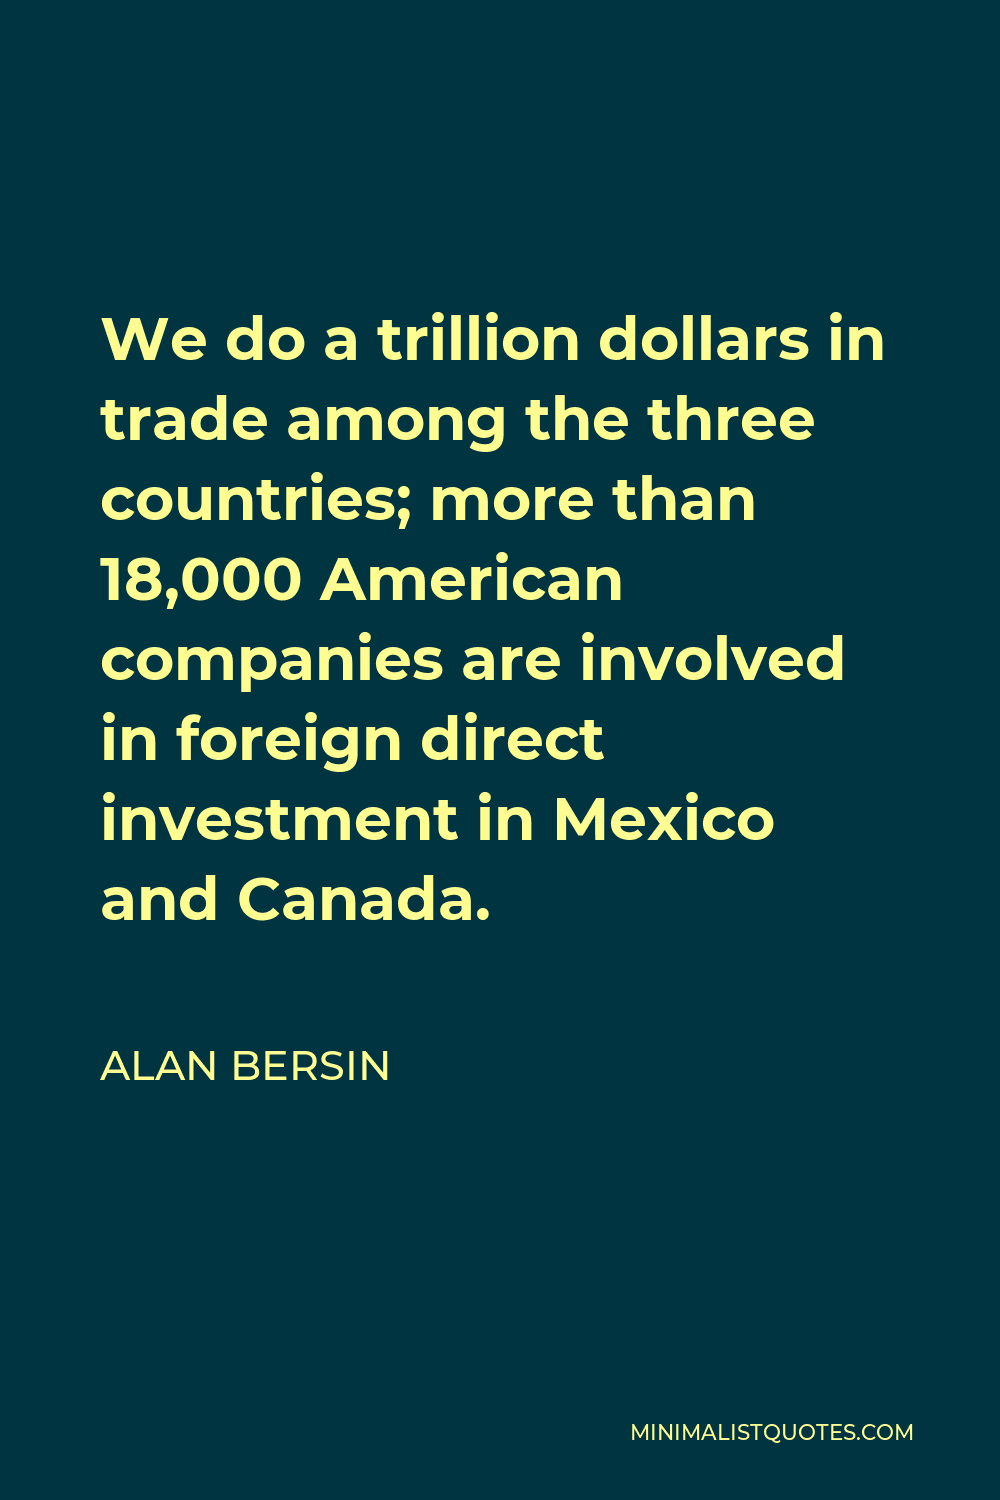 Alan Bersin Quote - We do a trillion dollars in trade among the three countries; more than 18,000 American companies are involved in foreign direct investment in Mexico and Canada.